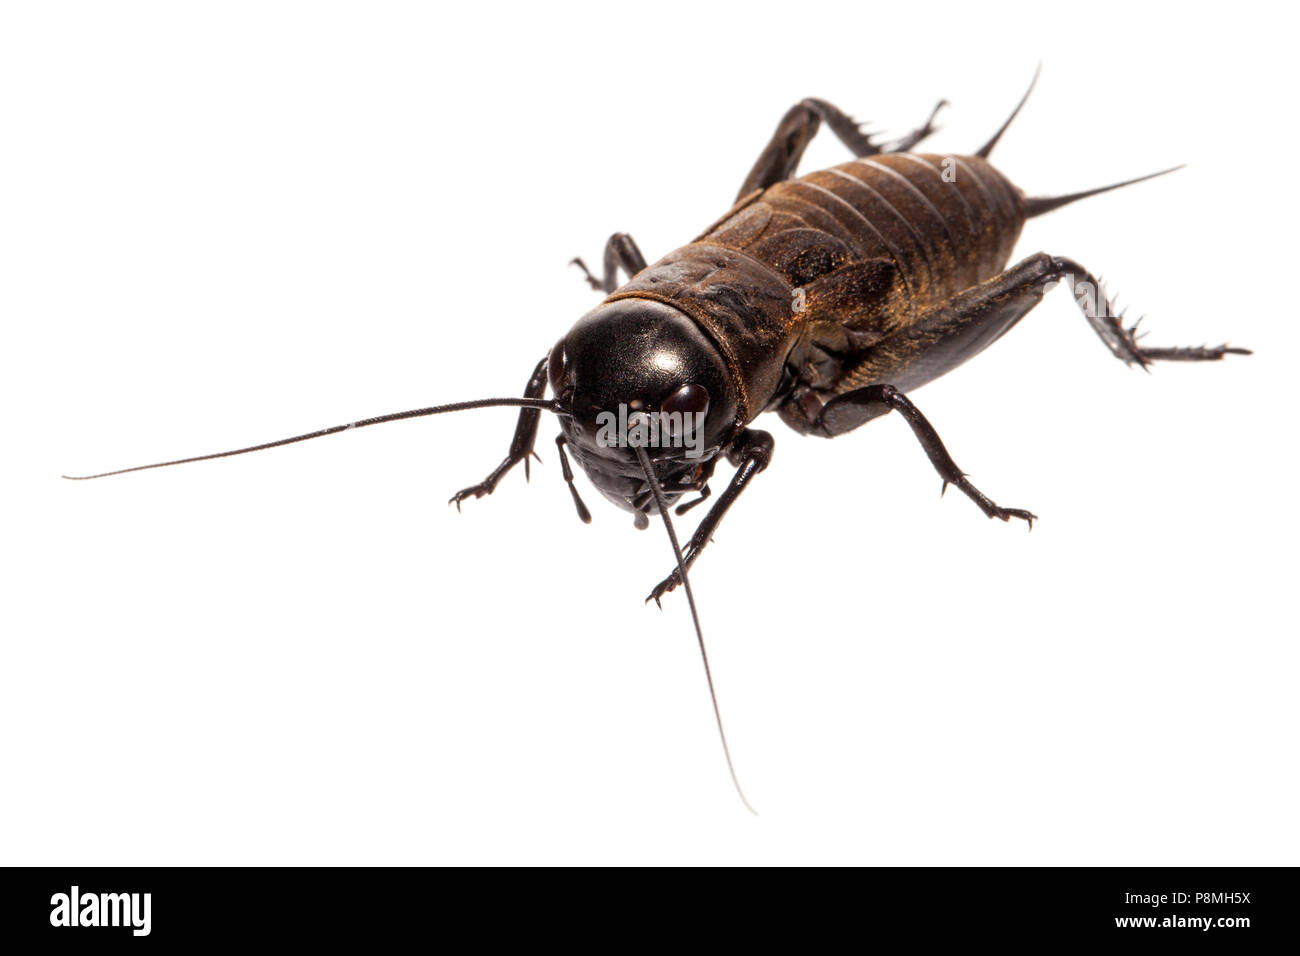 field cricket isolated against a white background Stock Photo